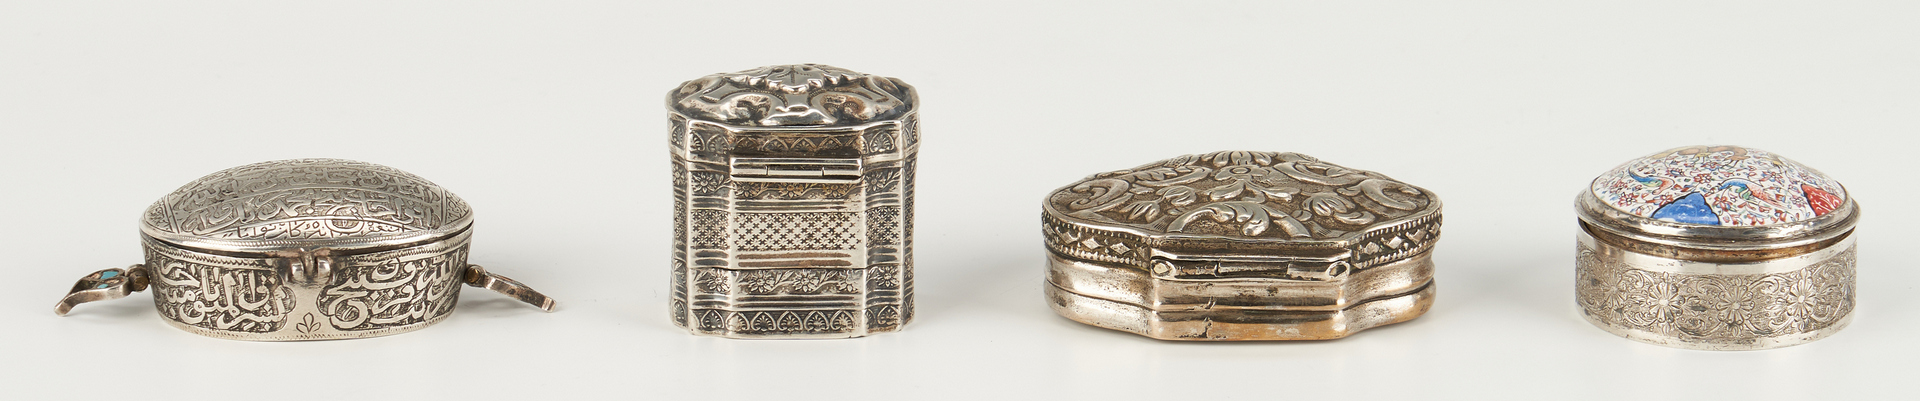 Lot 26: 6 Small Boxes, most Persian Silver